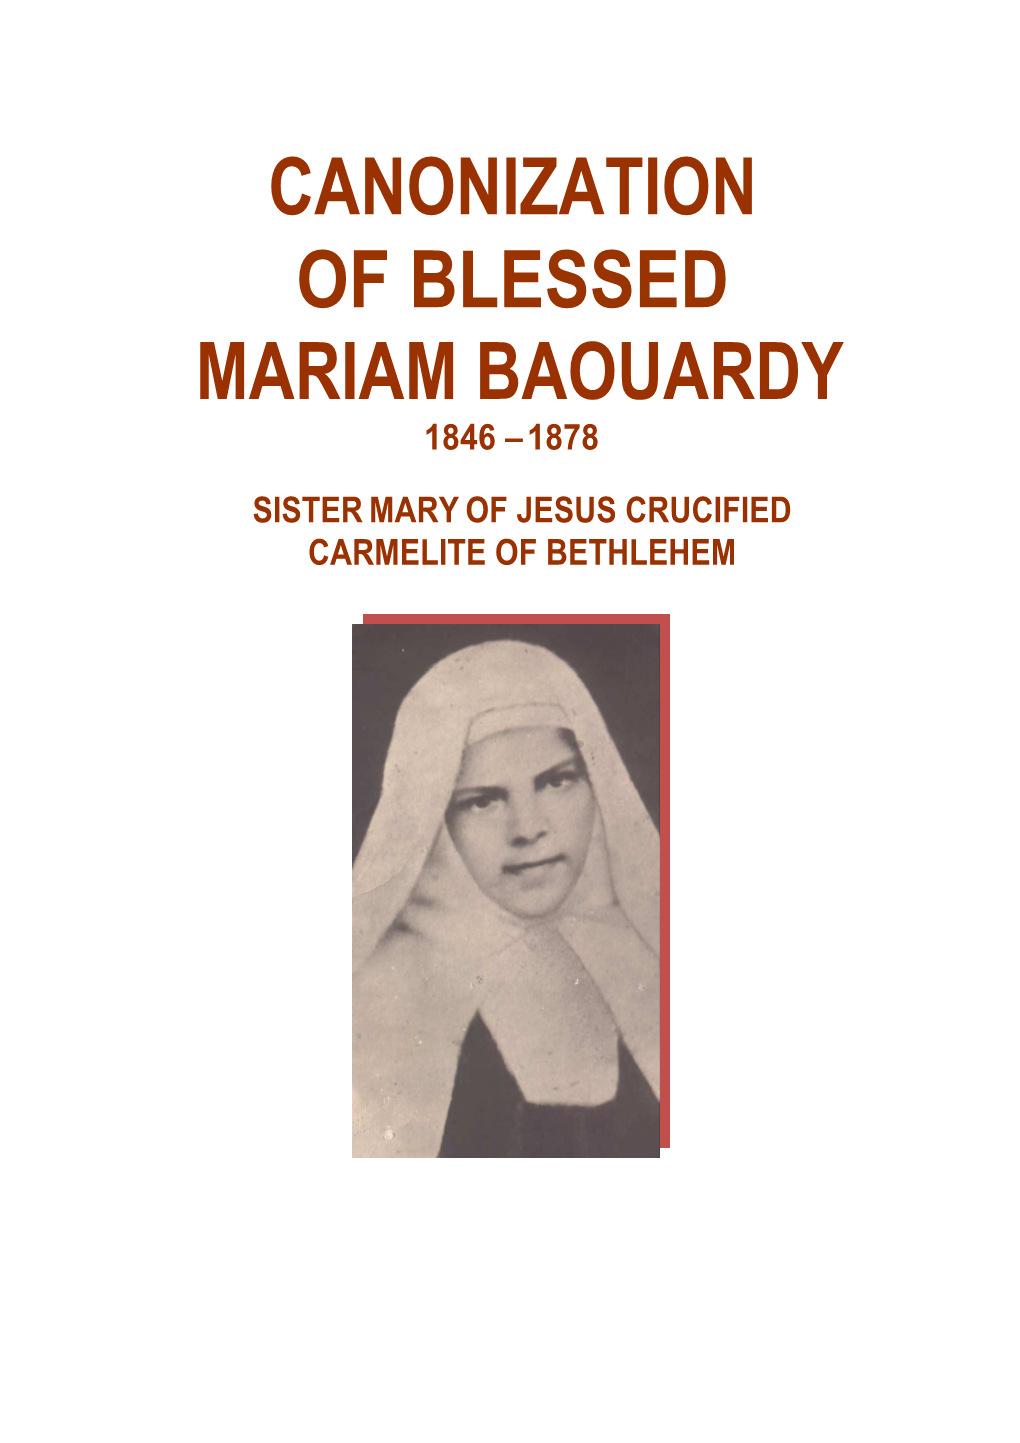 Canonization of Blessed Mariam Baouardy 1846 – 1878